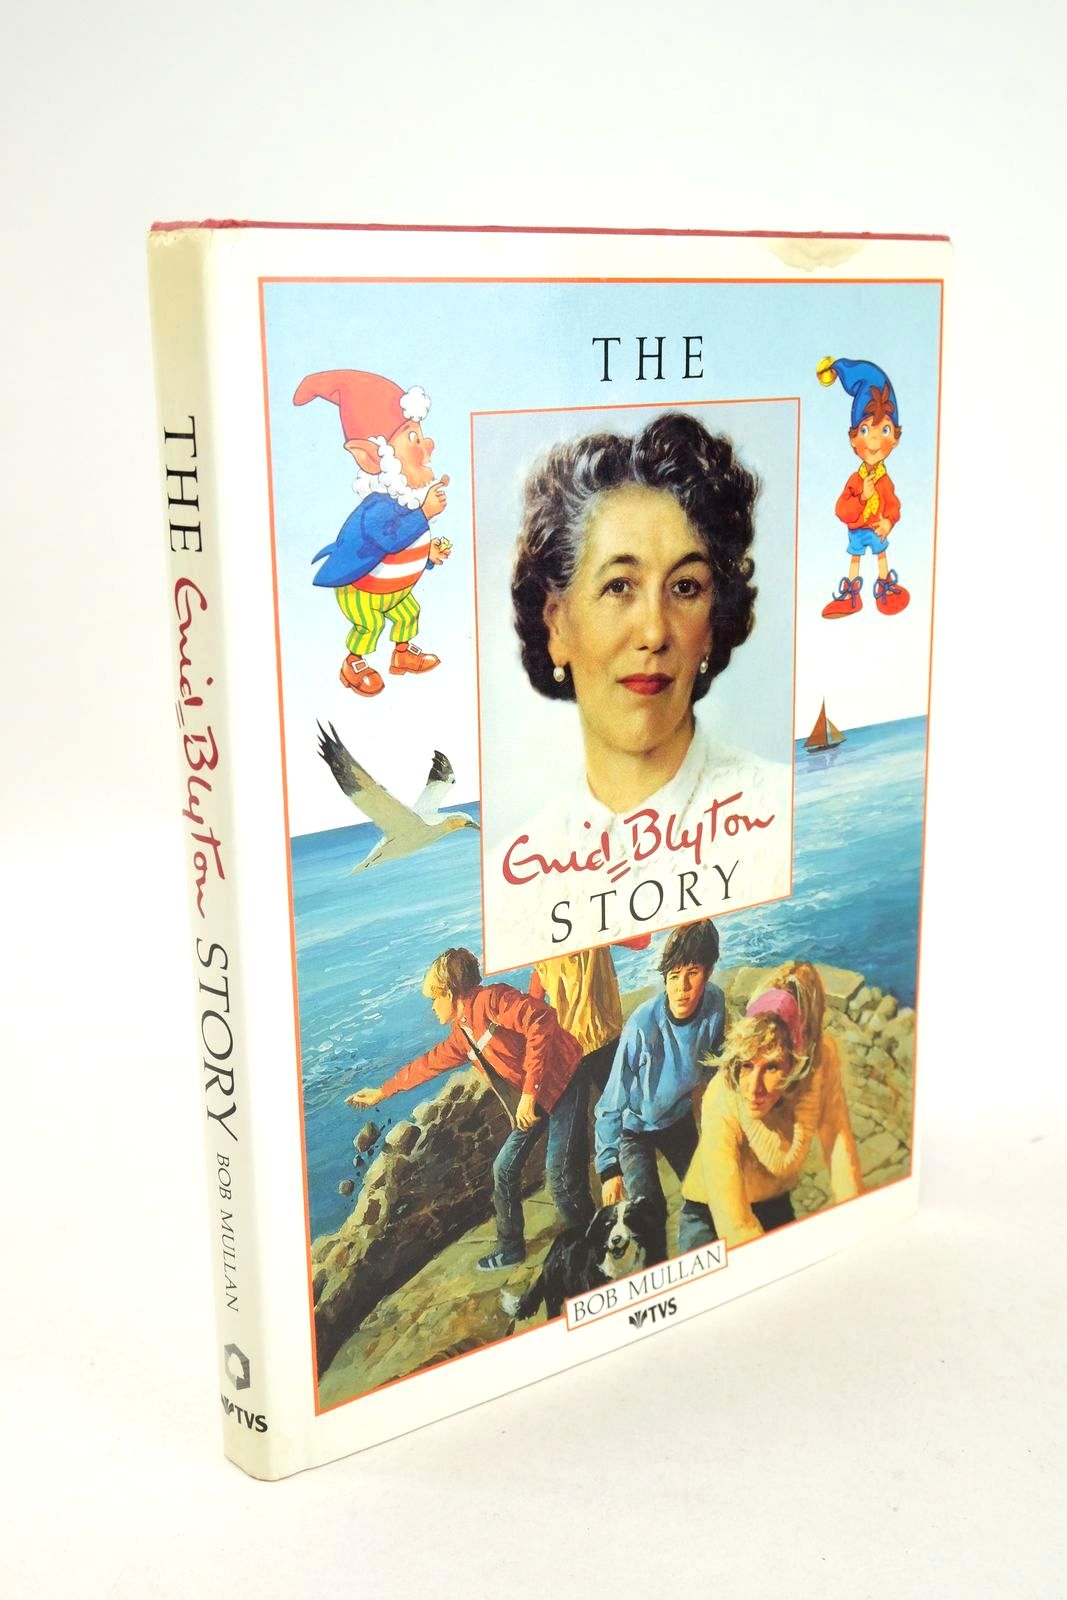 Photo of THE ENID BLYTON STORY written by Blyton, Enid
Mullan, Bob published by Boxtree (STOCK CODE: 1325788)  for sale by Stella & Rose's Books